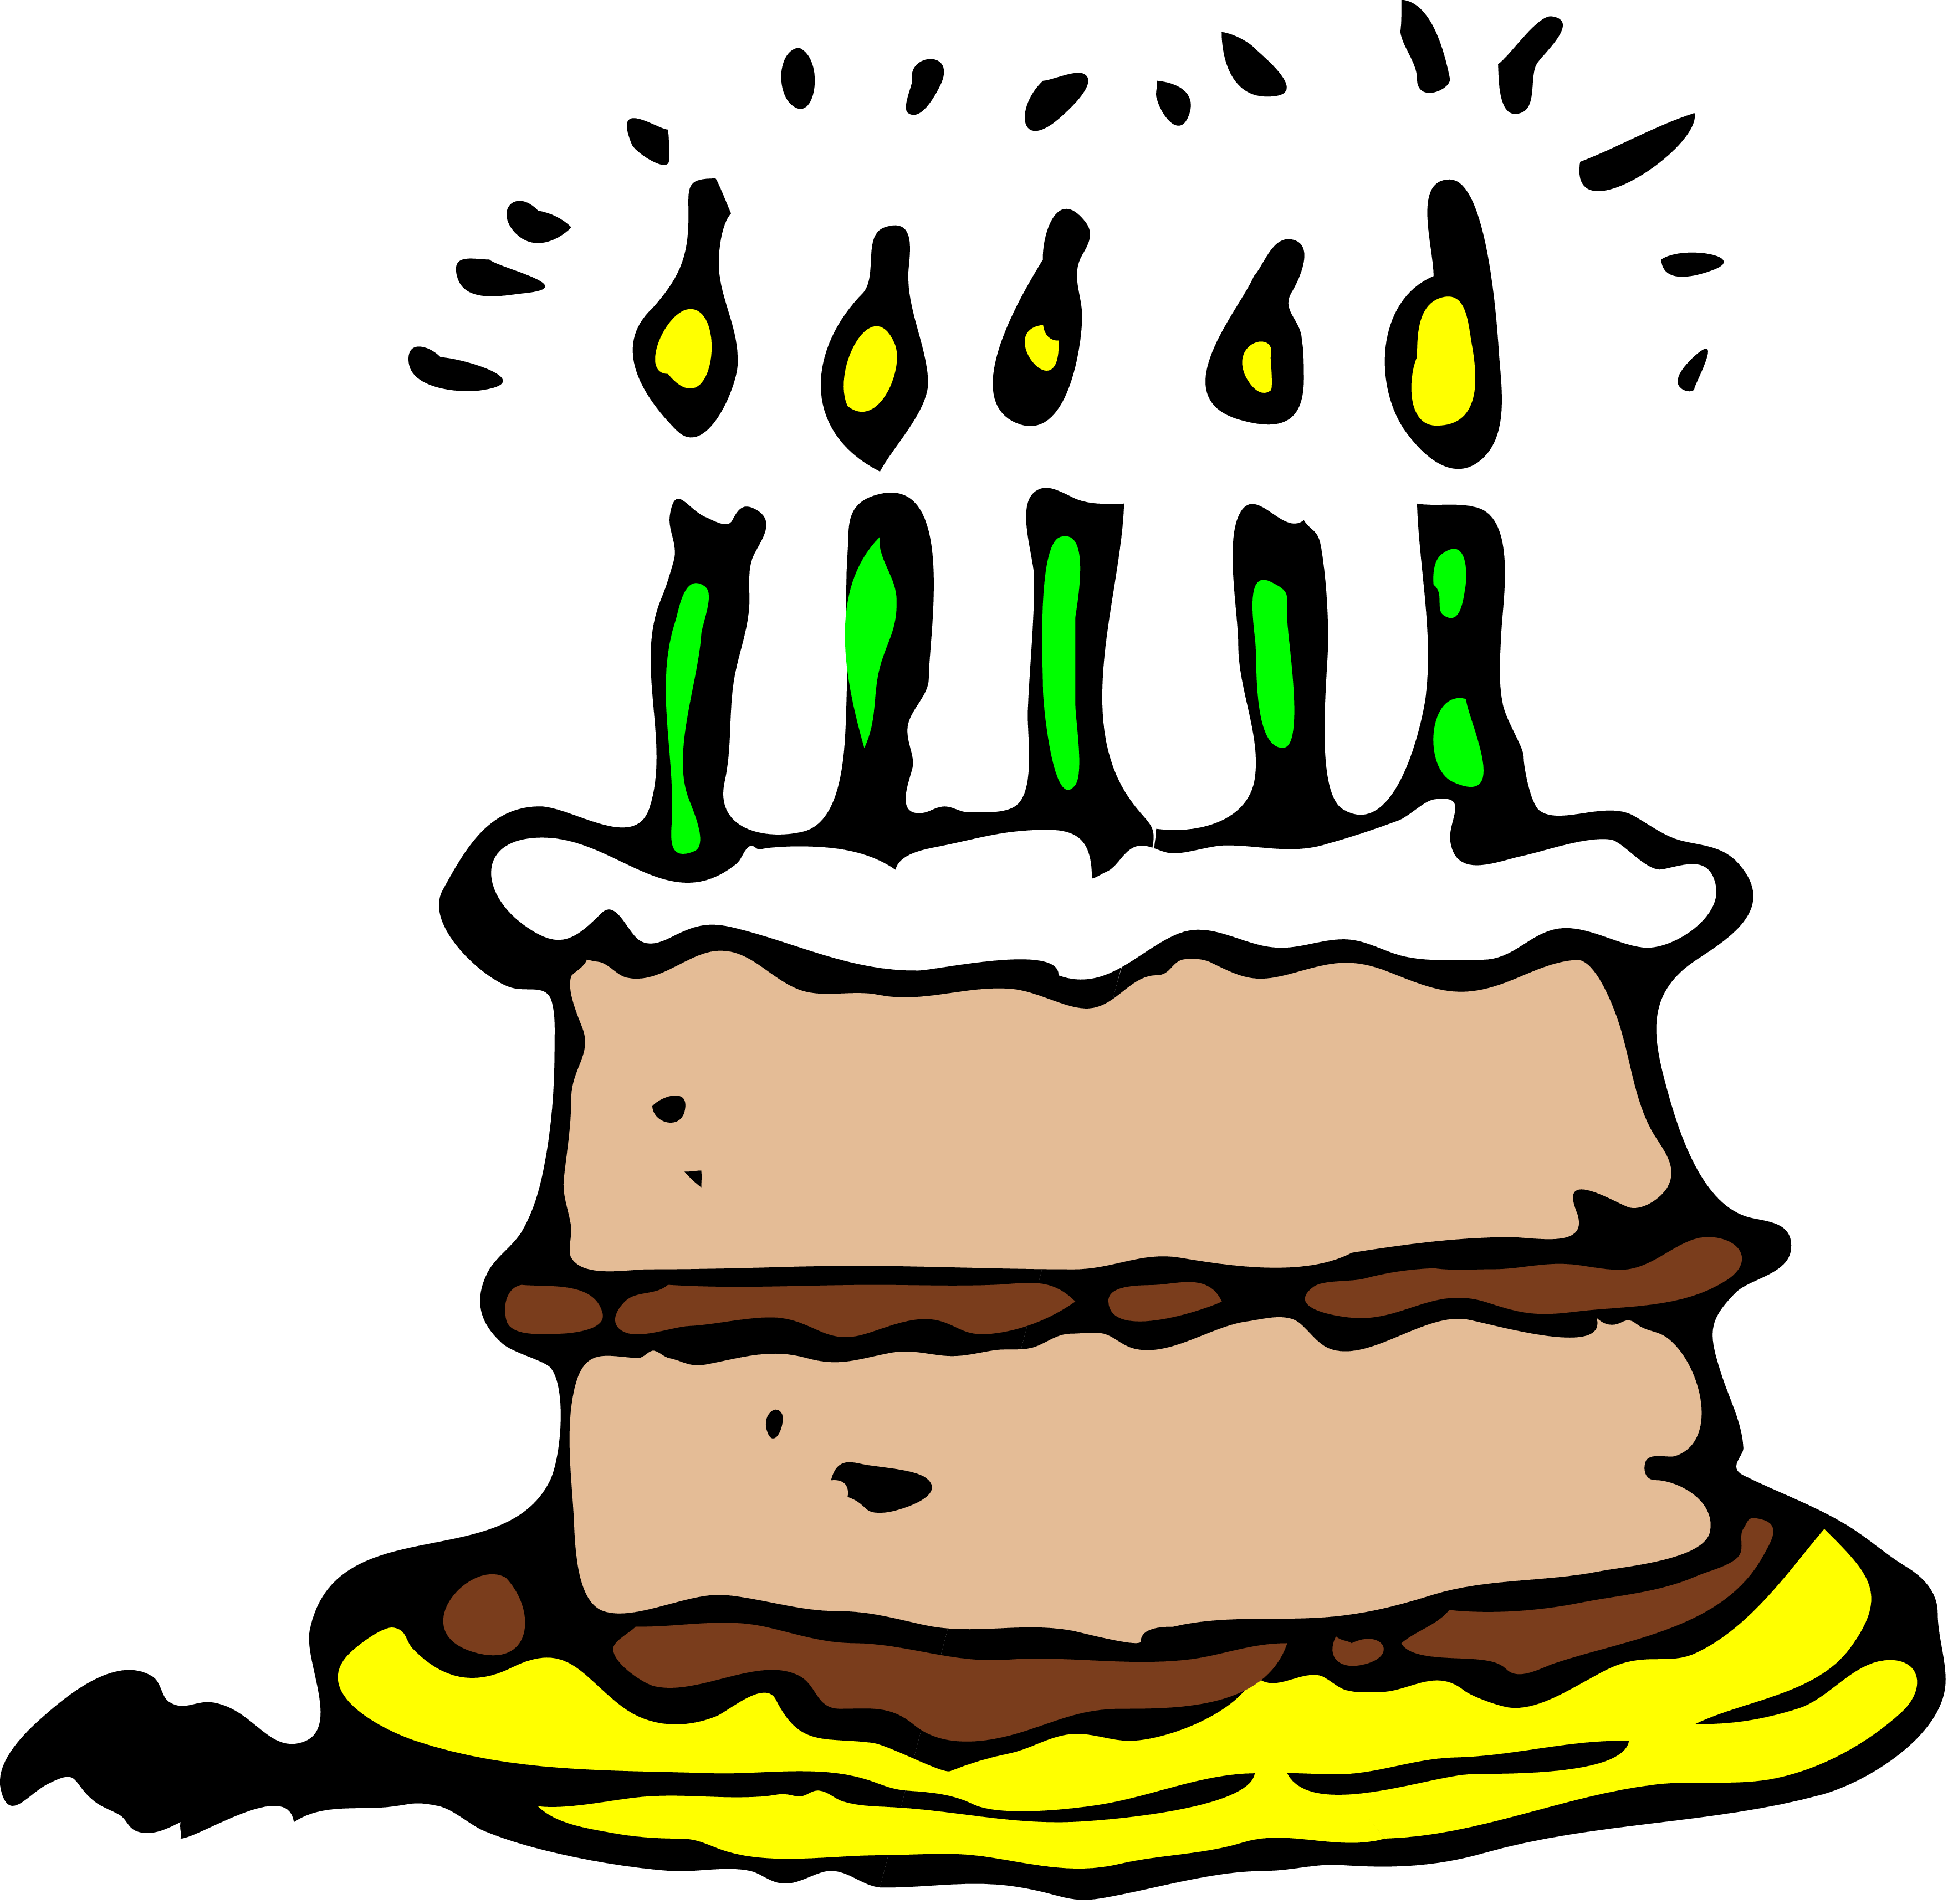 clipart cake october